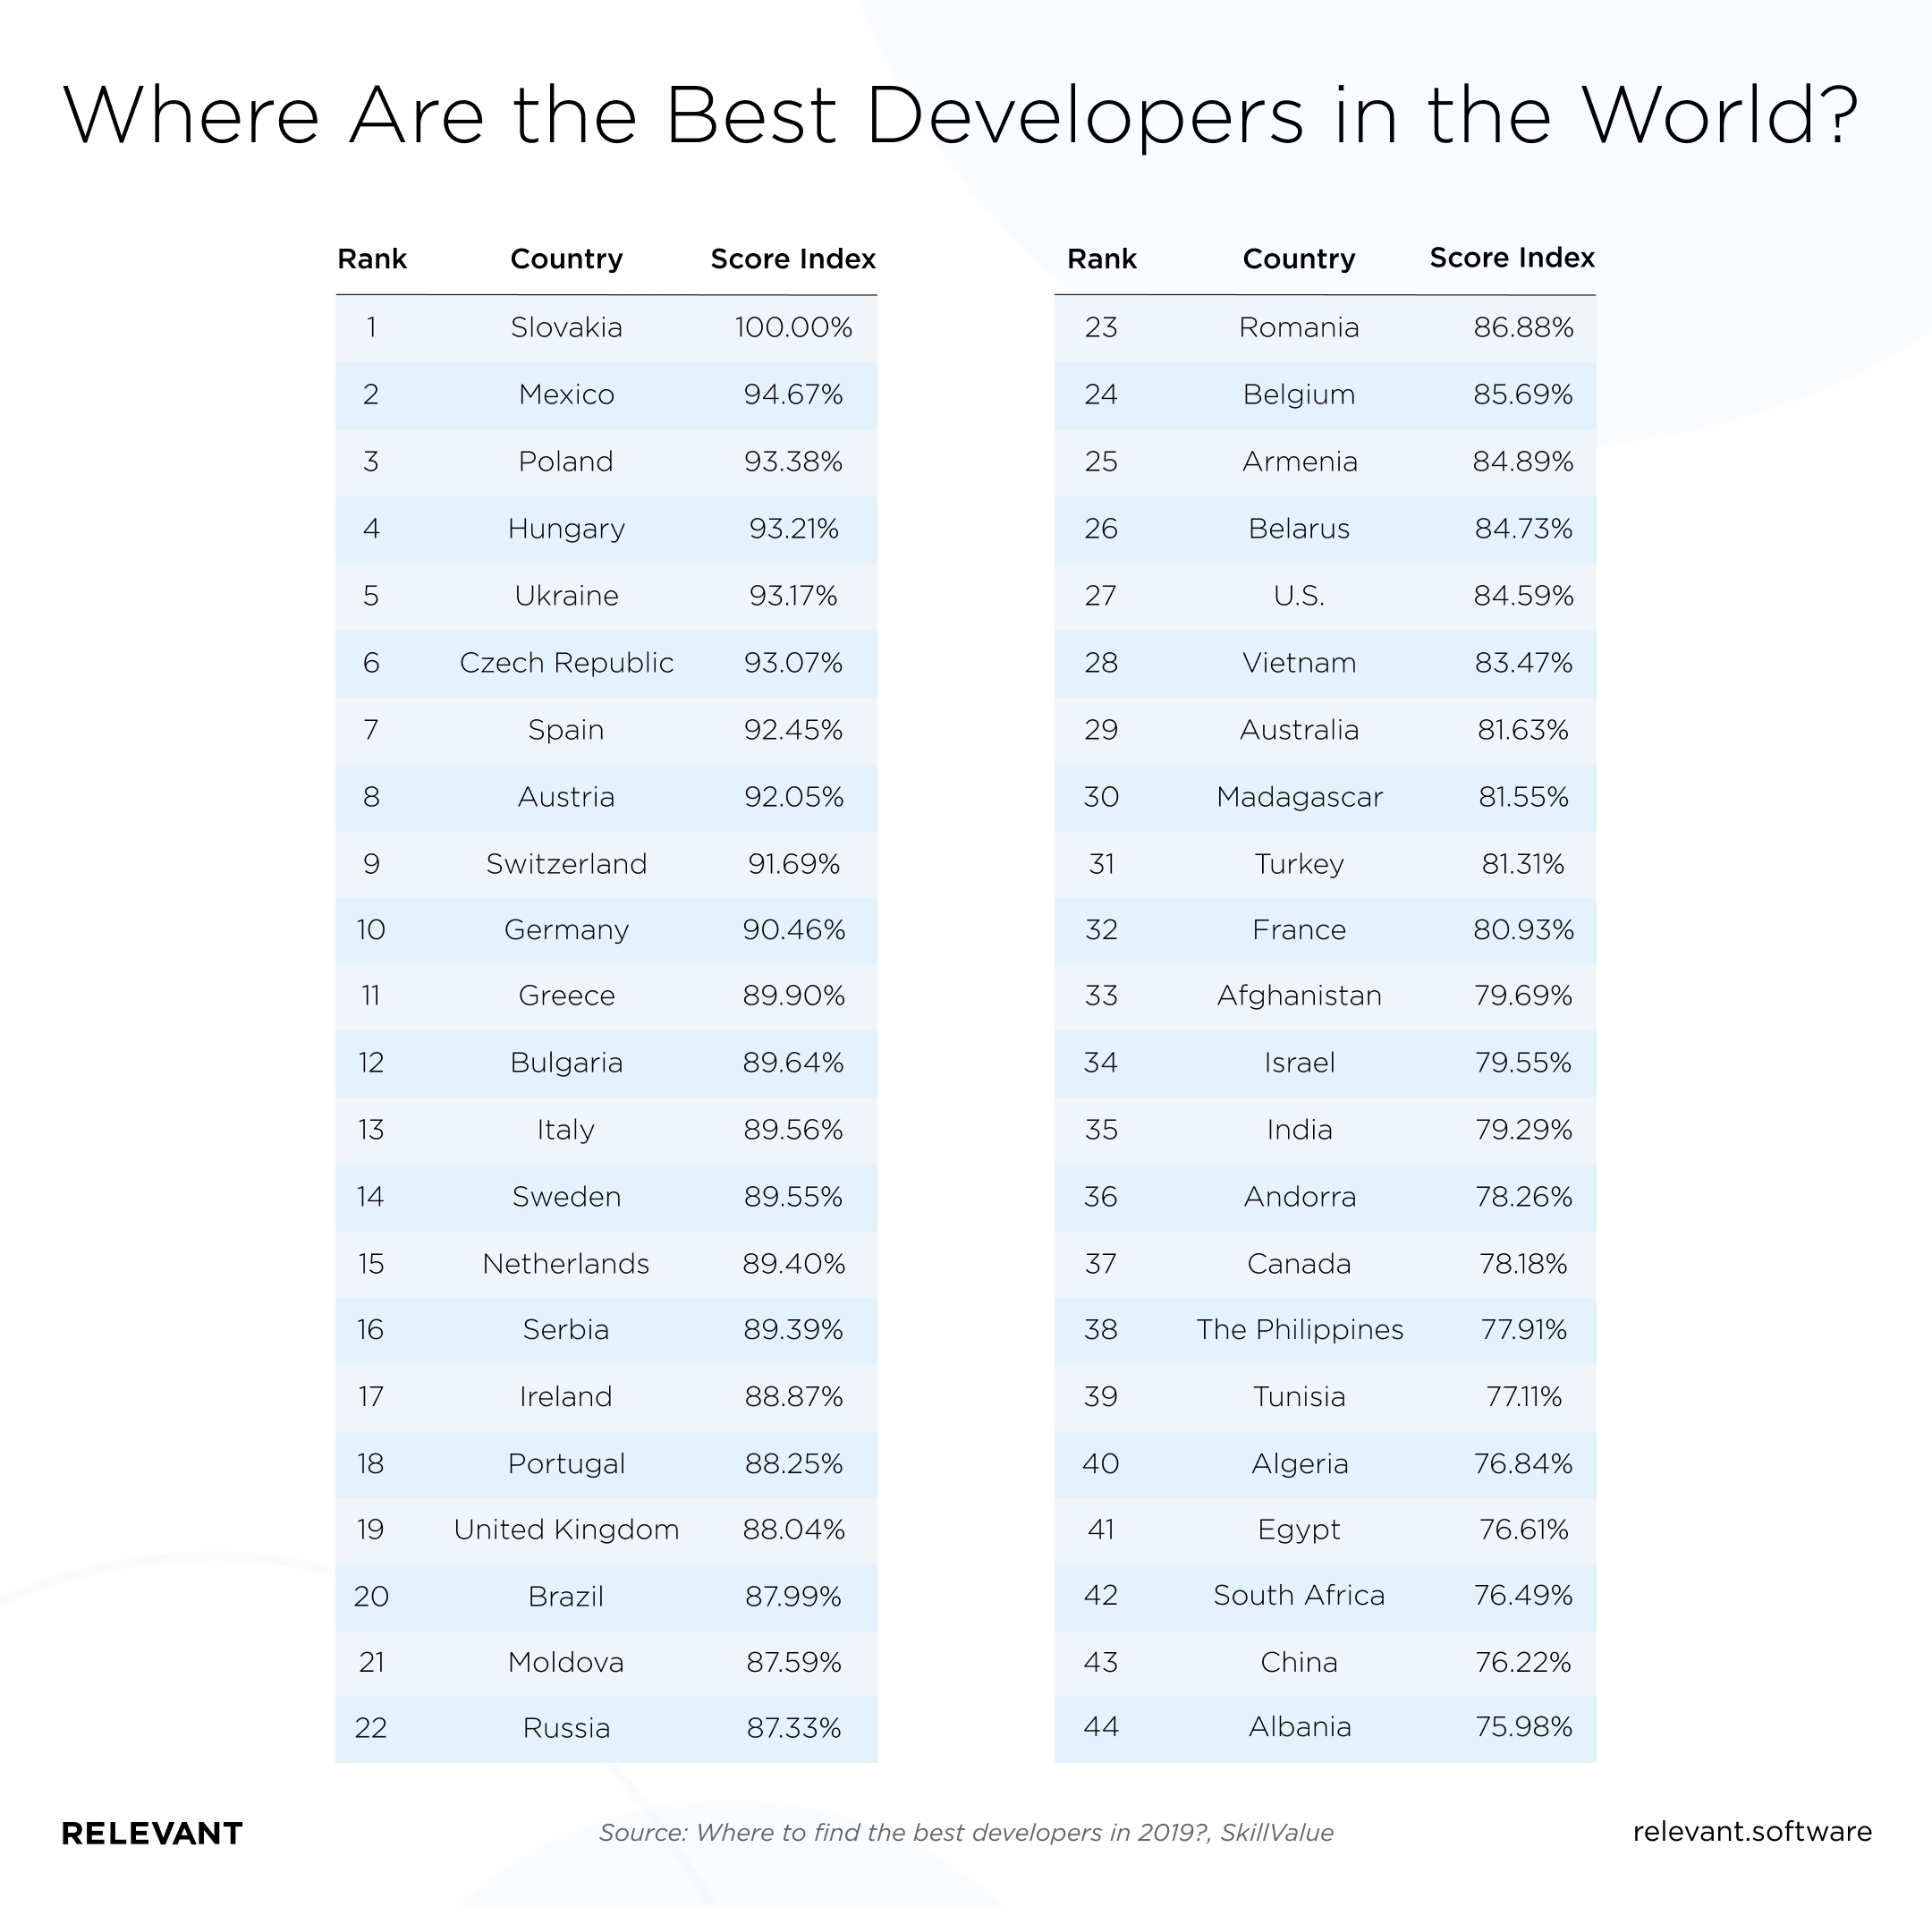 Mexican developers are reported to have second-best programming skills worldwide.